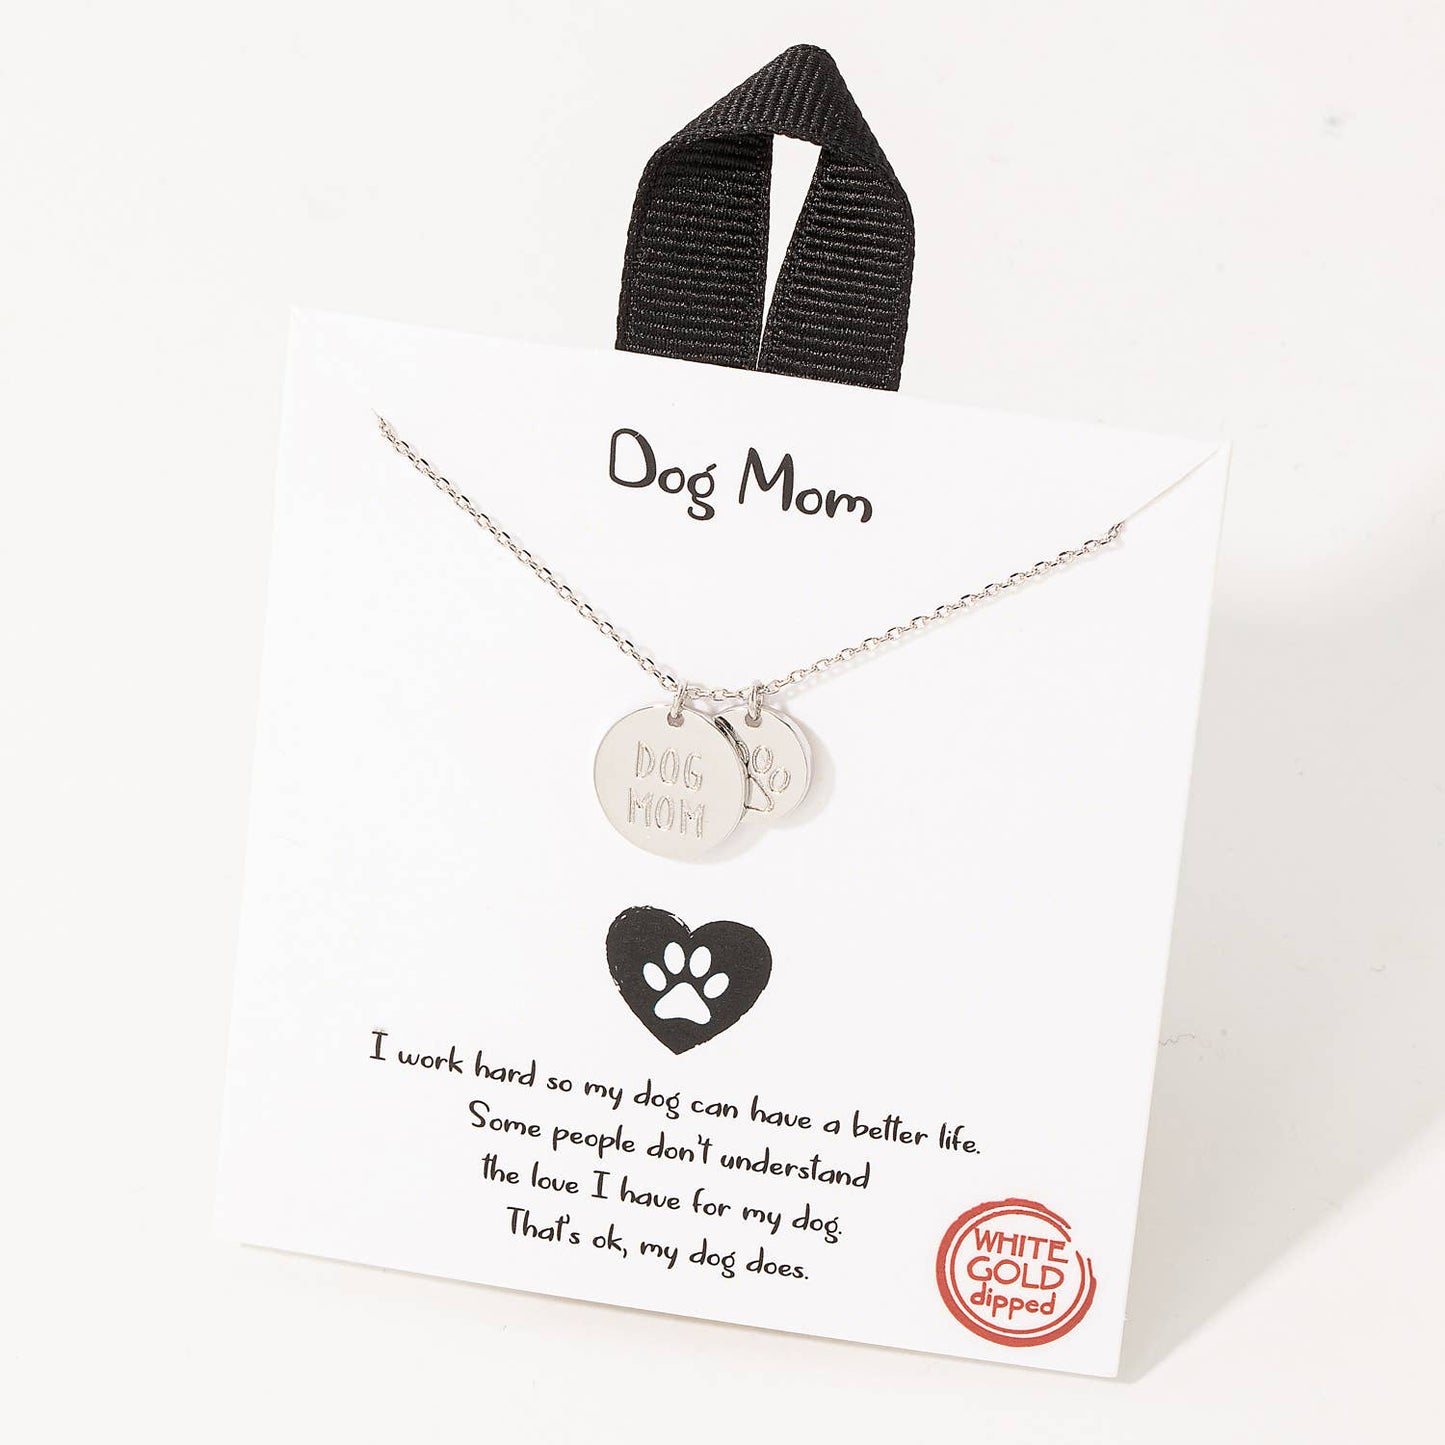 Dog Mom Coin Charm Necklace